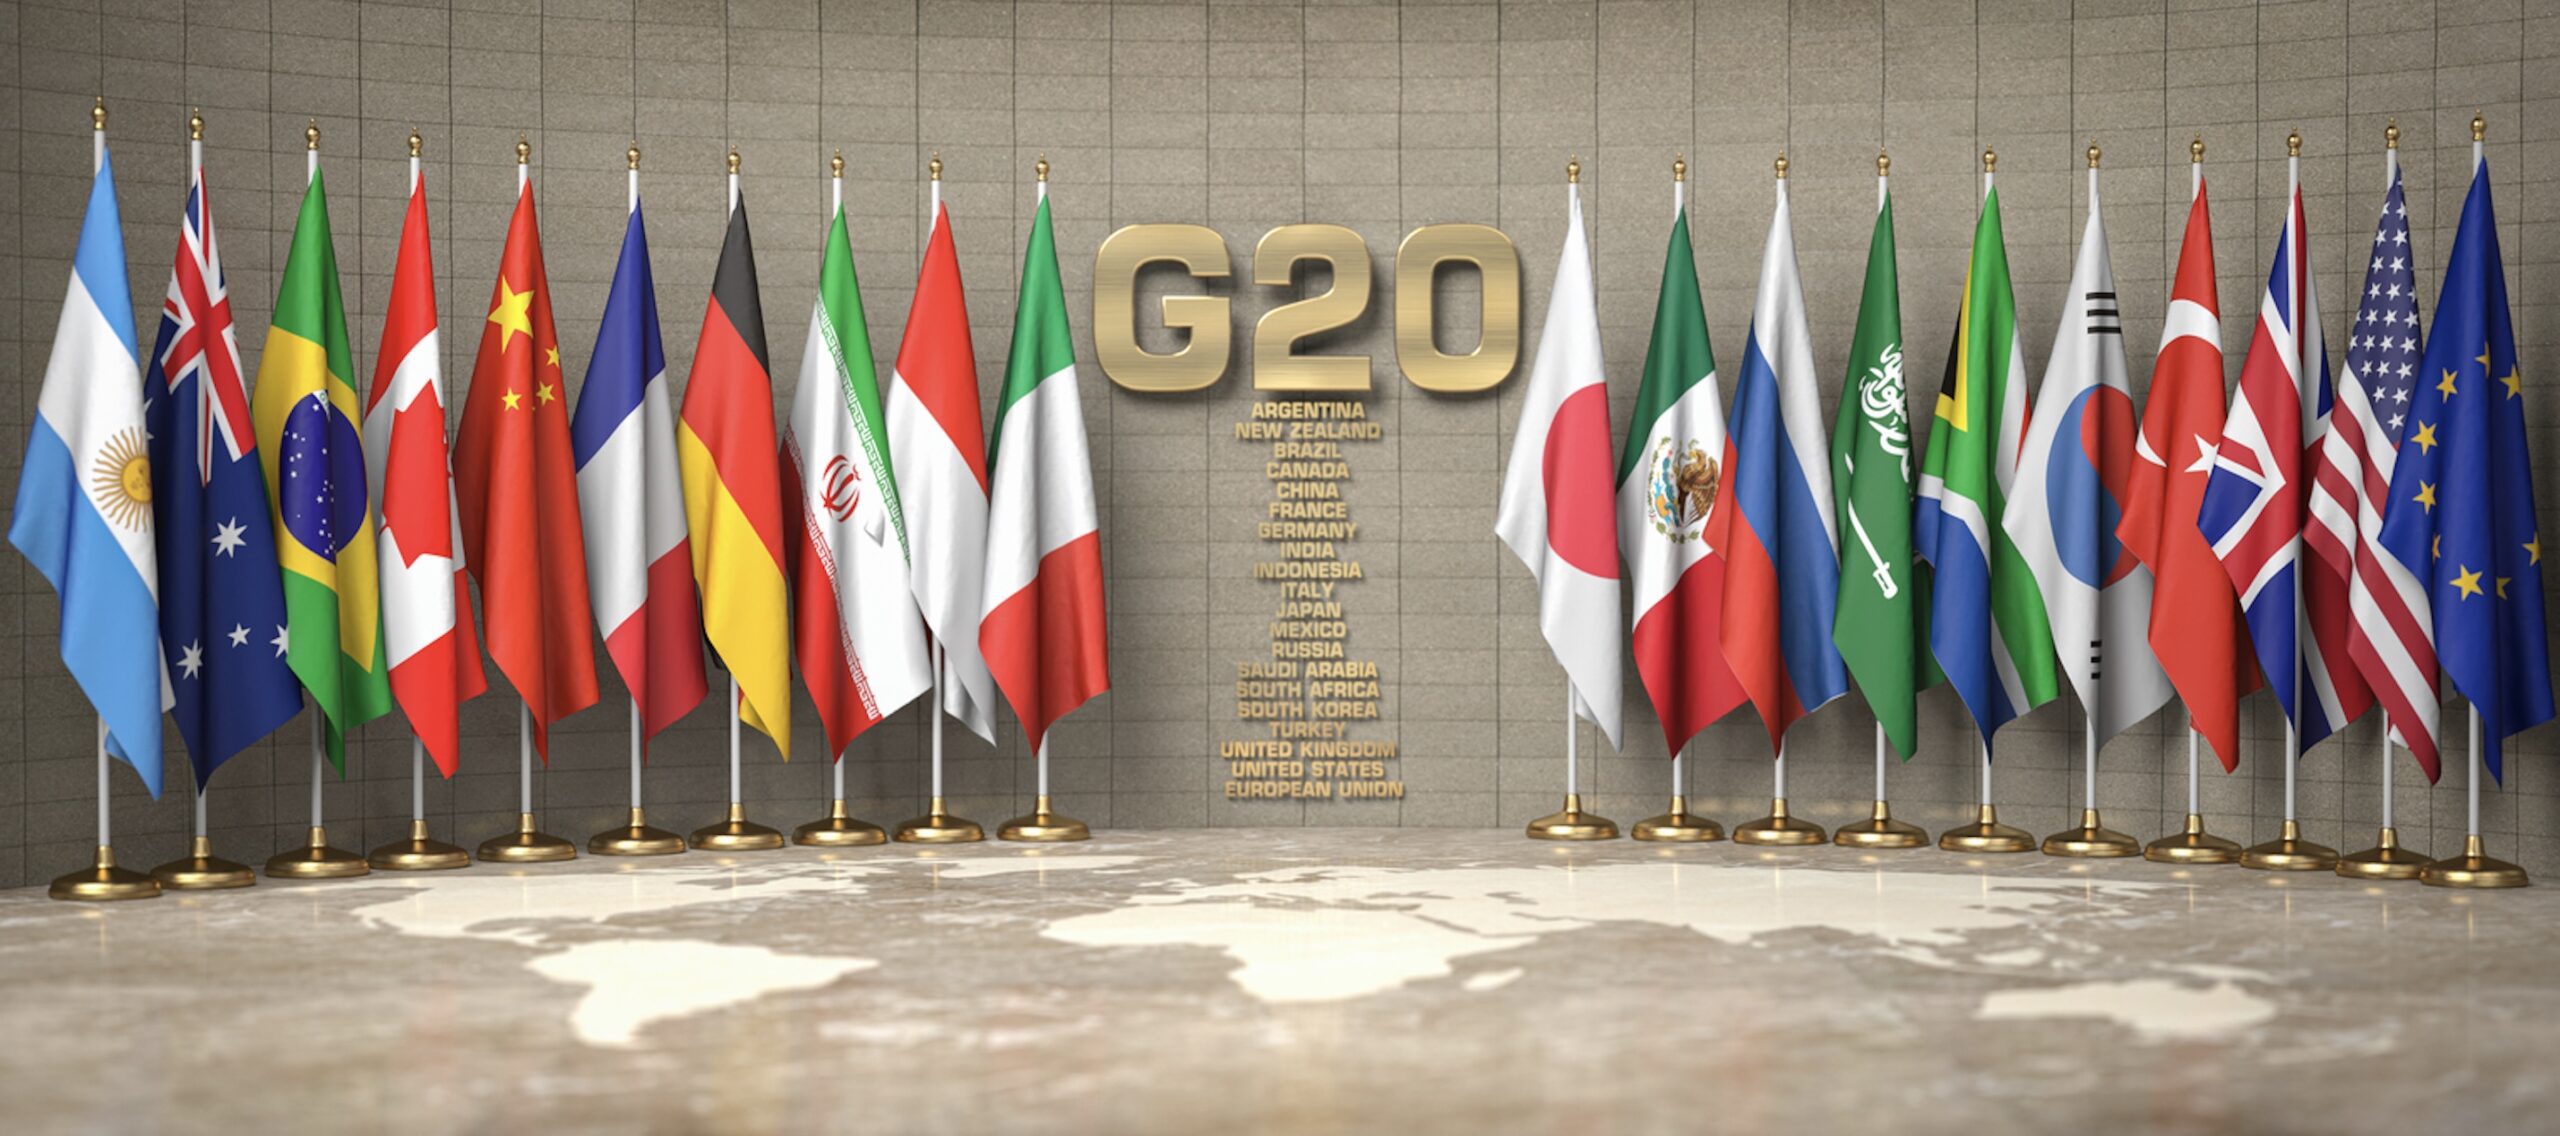 Joint Statement of NATO and G7 Leaders at G20 Summit in Bali